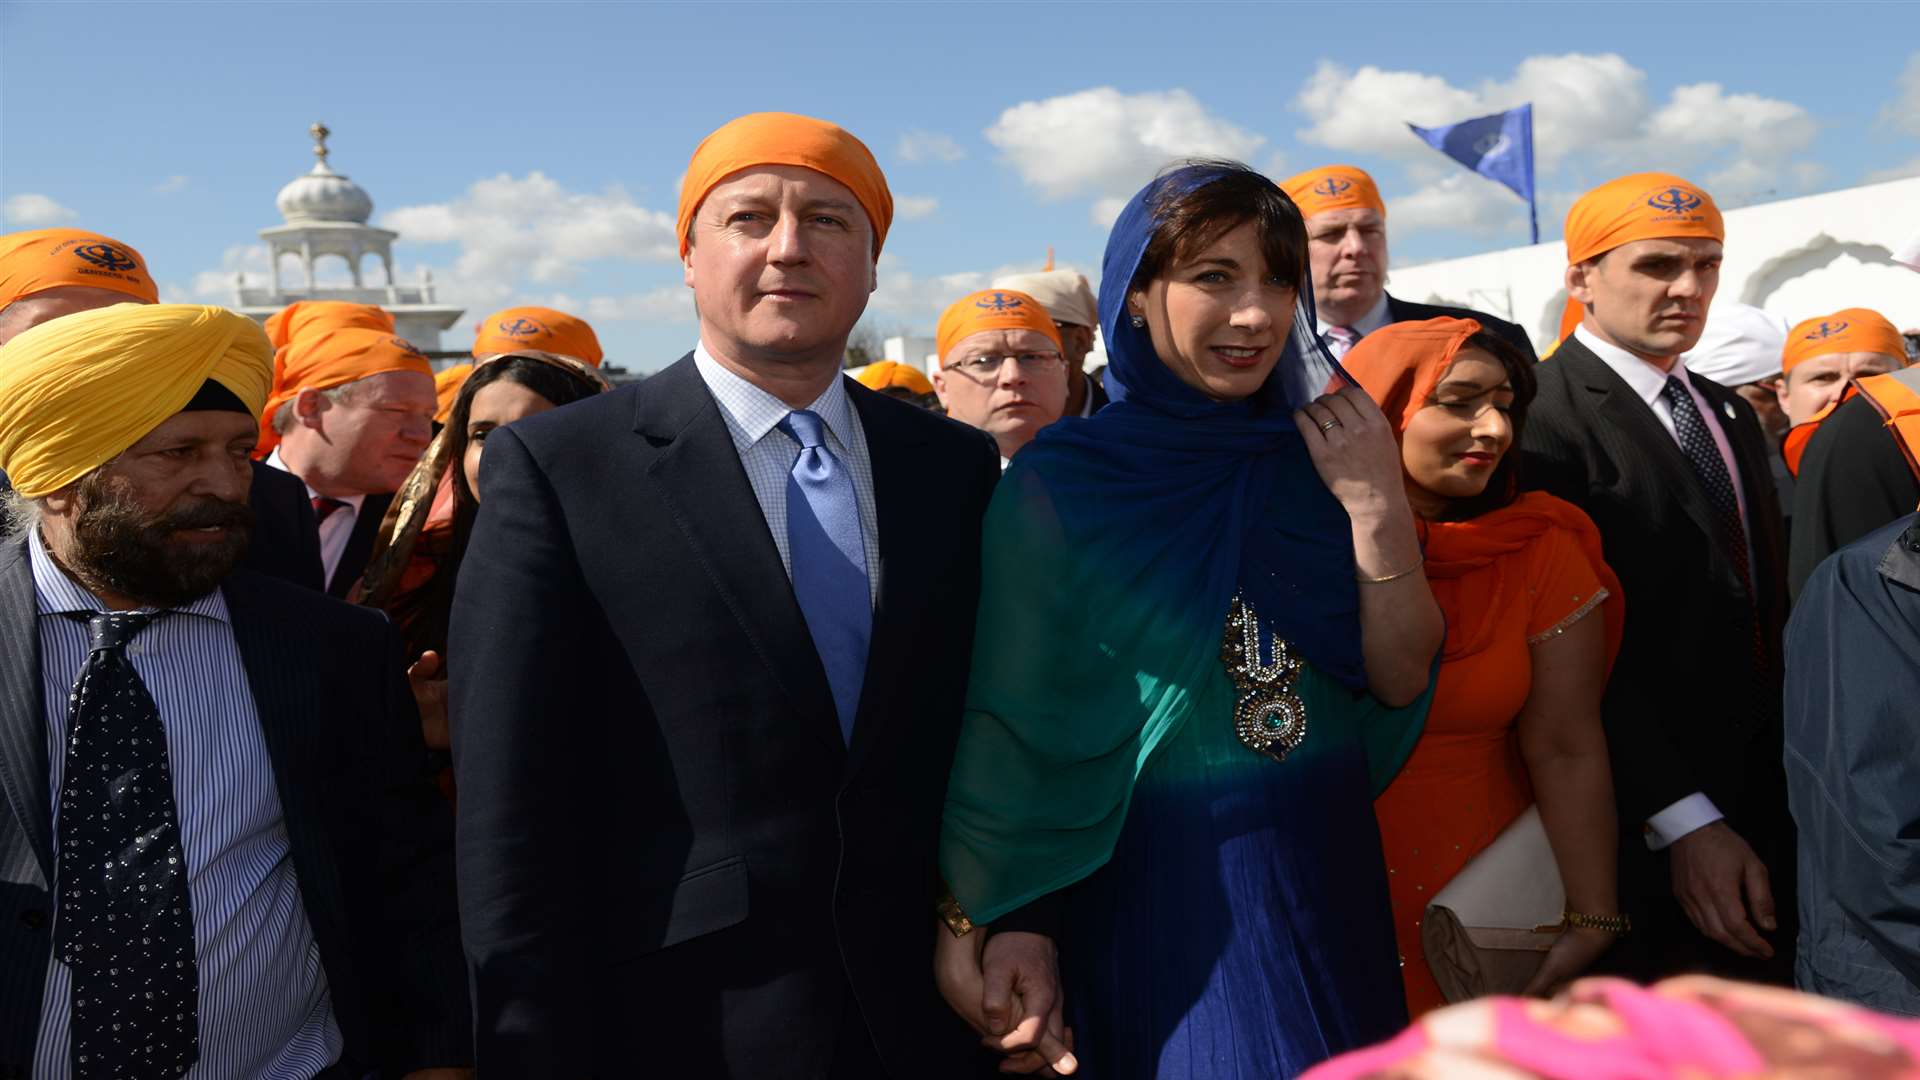 David and Samantha Cameron arrive at the Sikh festival of Vaisakhi in Gravesend Picture: Gary Browne